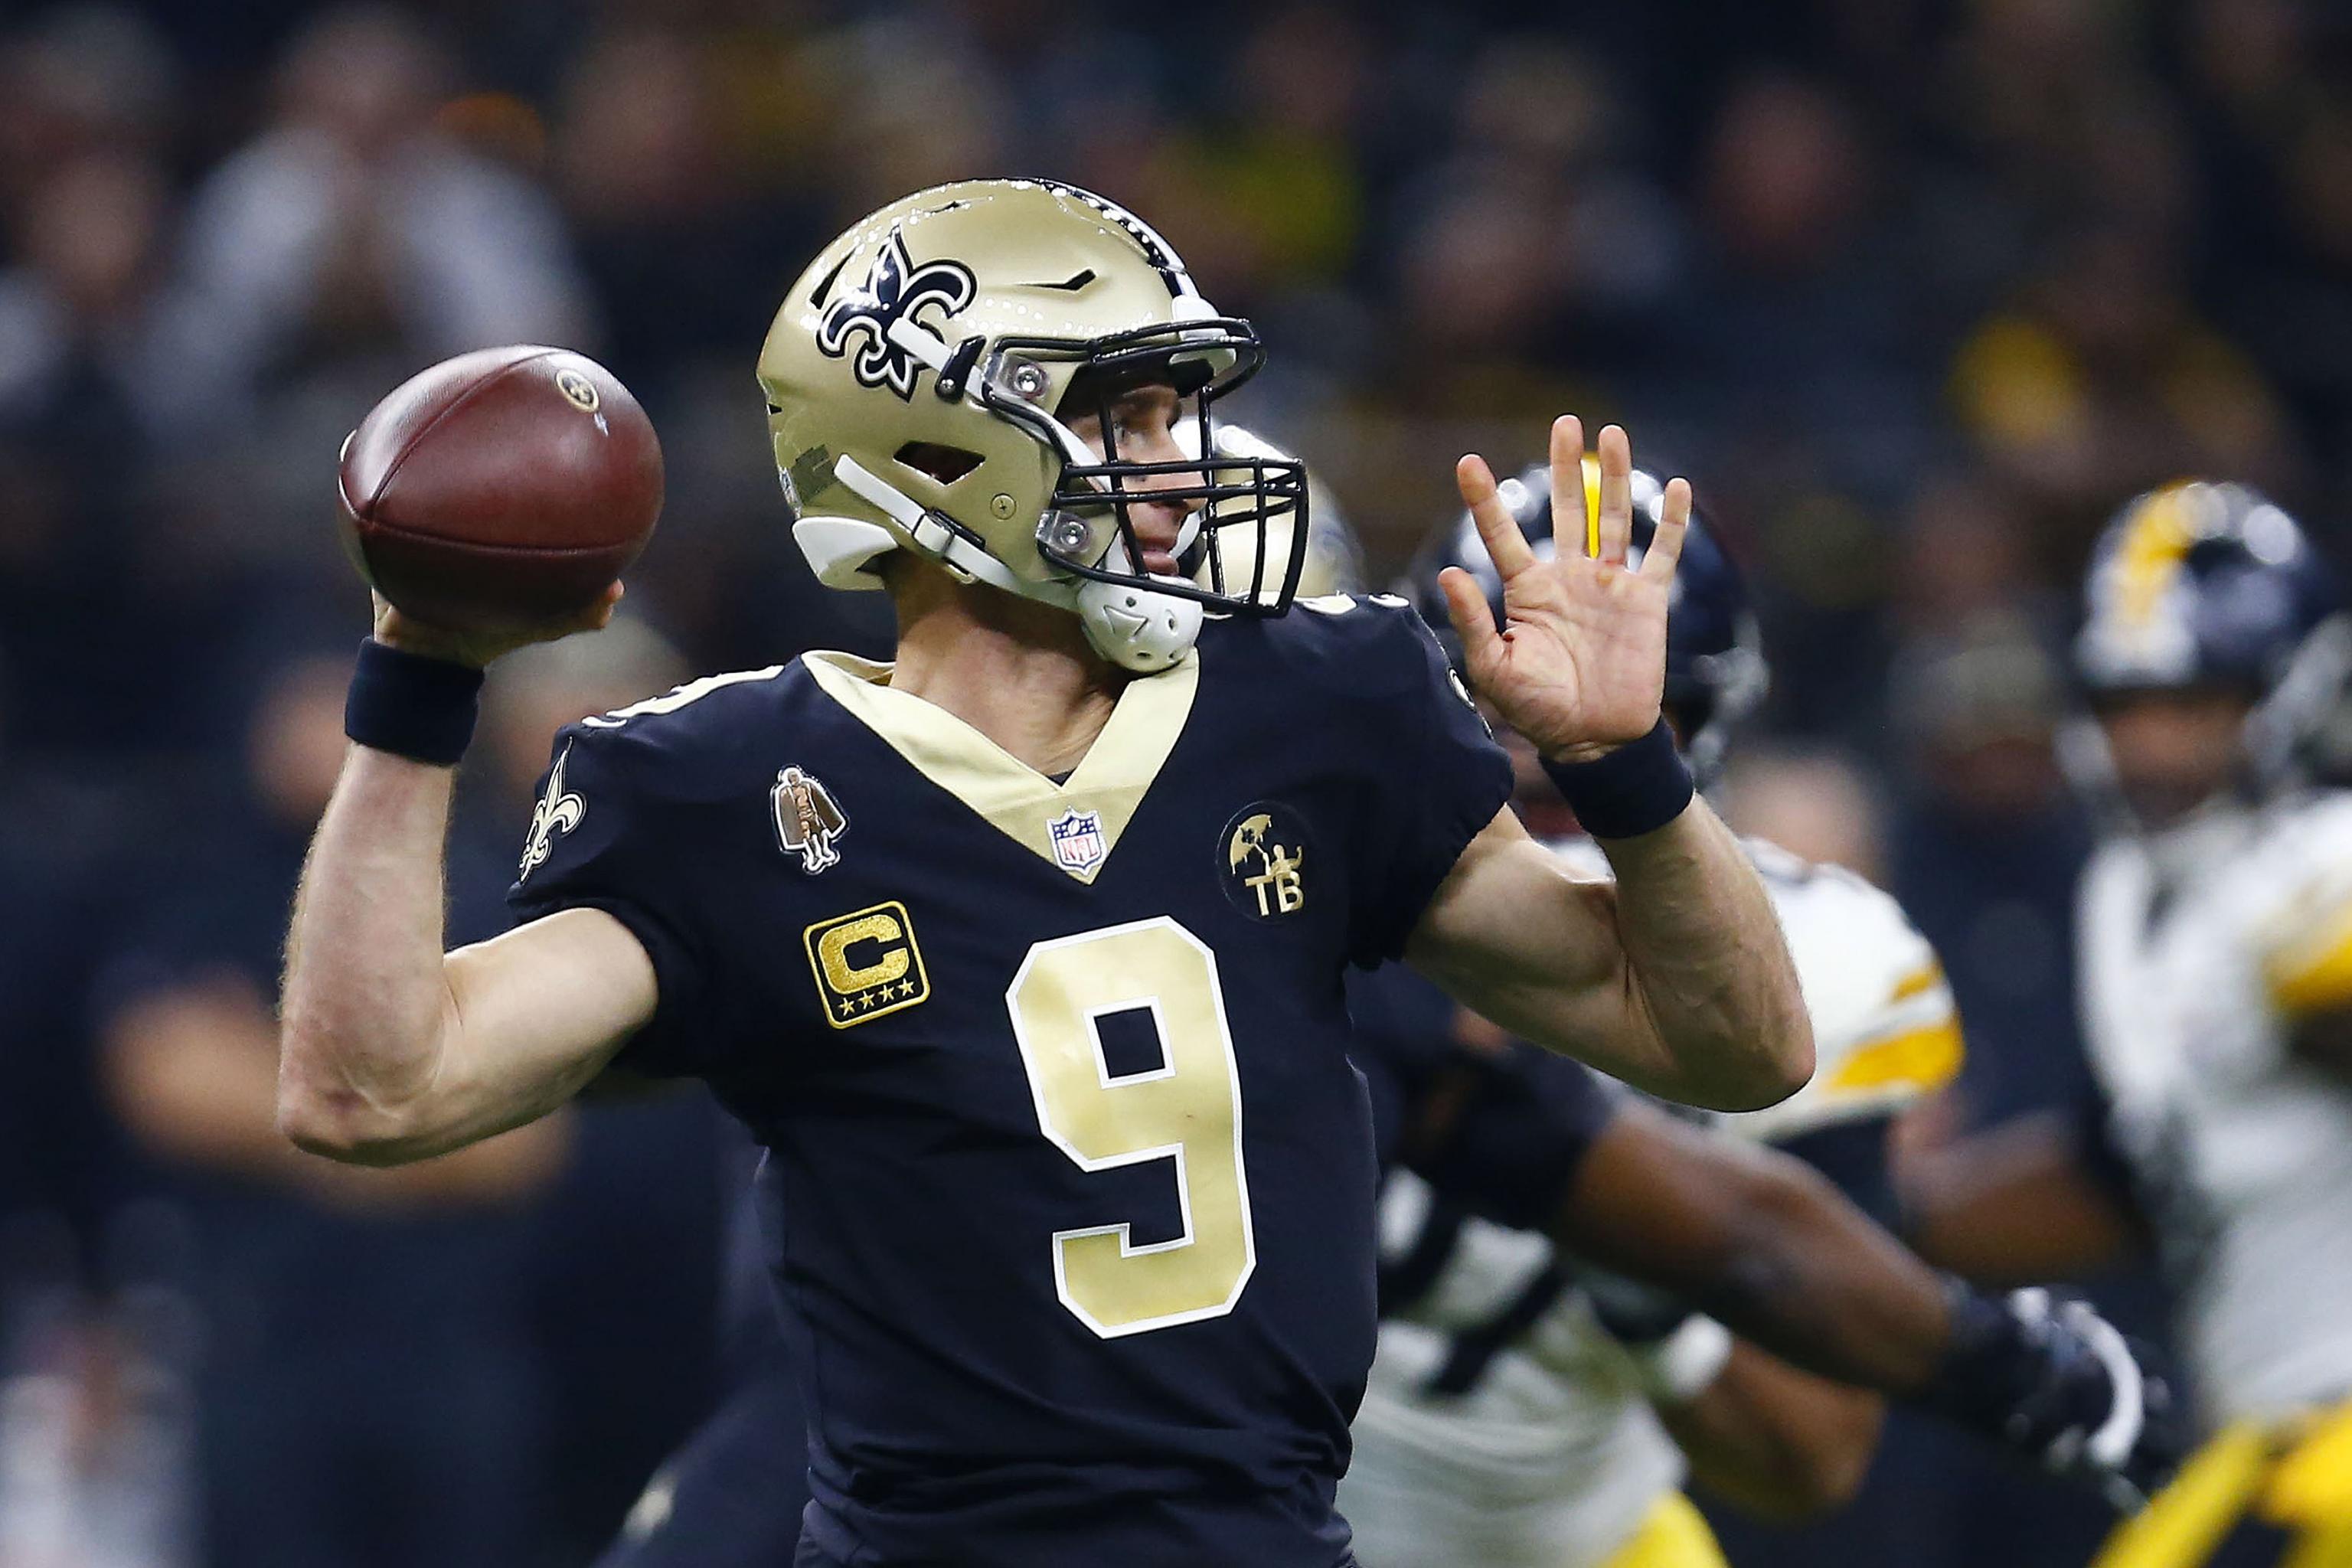 2019 NFL playoff predictions: Patriots, Saints among projected winners -  Pats Pulpit